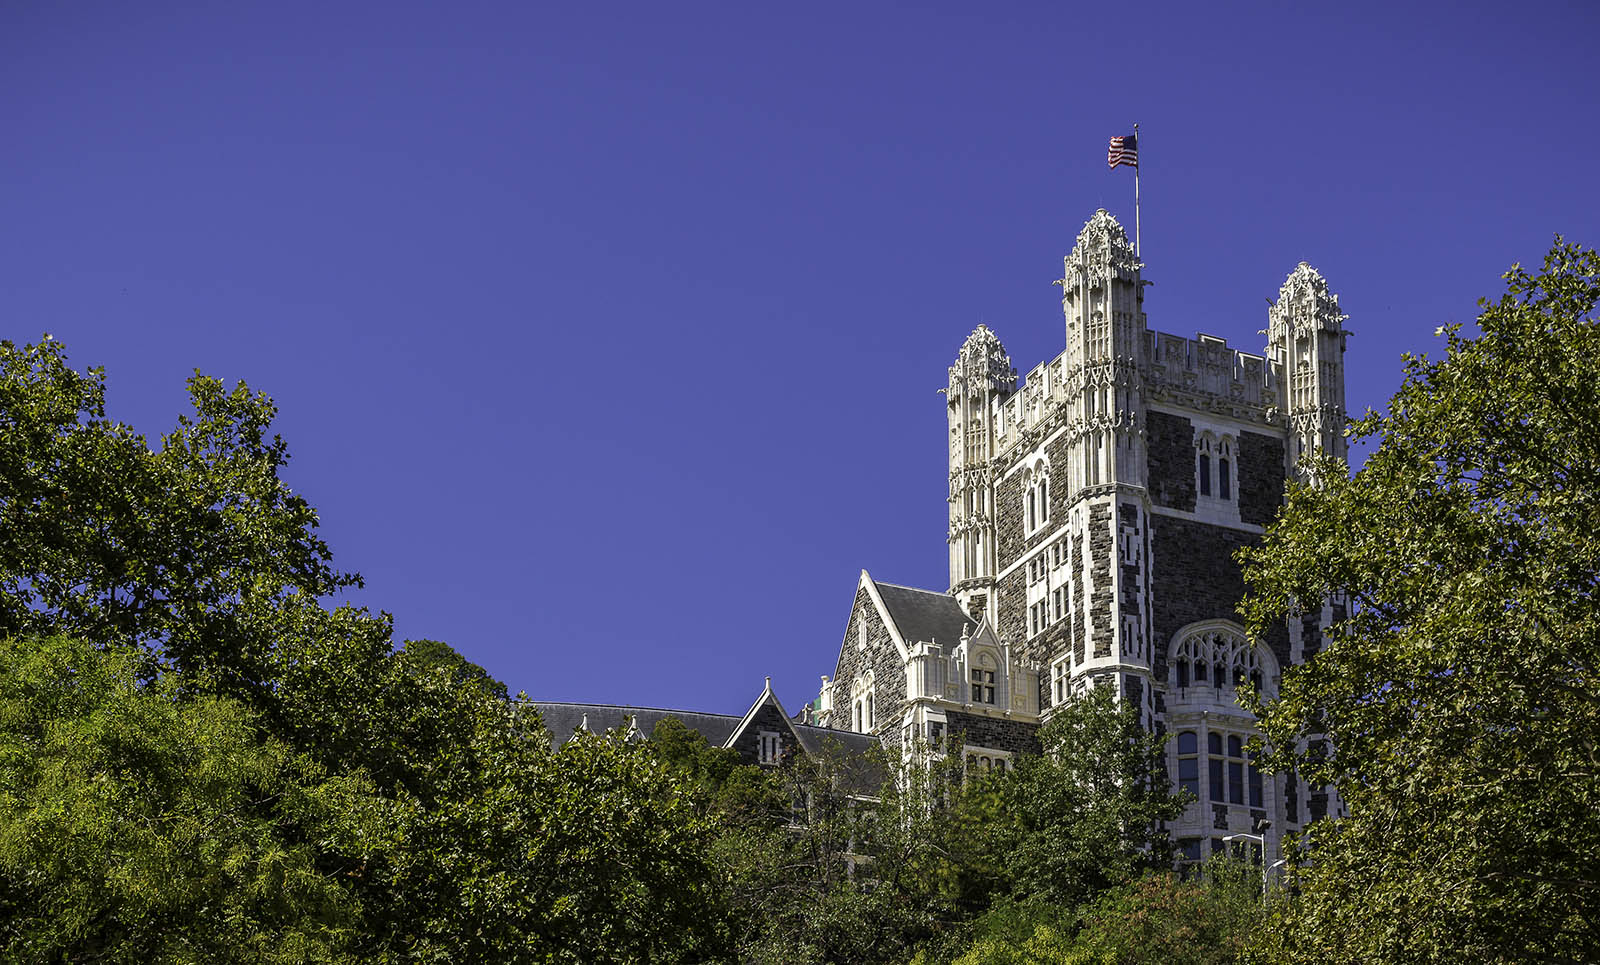 Shepard Hall tower with American flag flying and leafy trees below